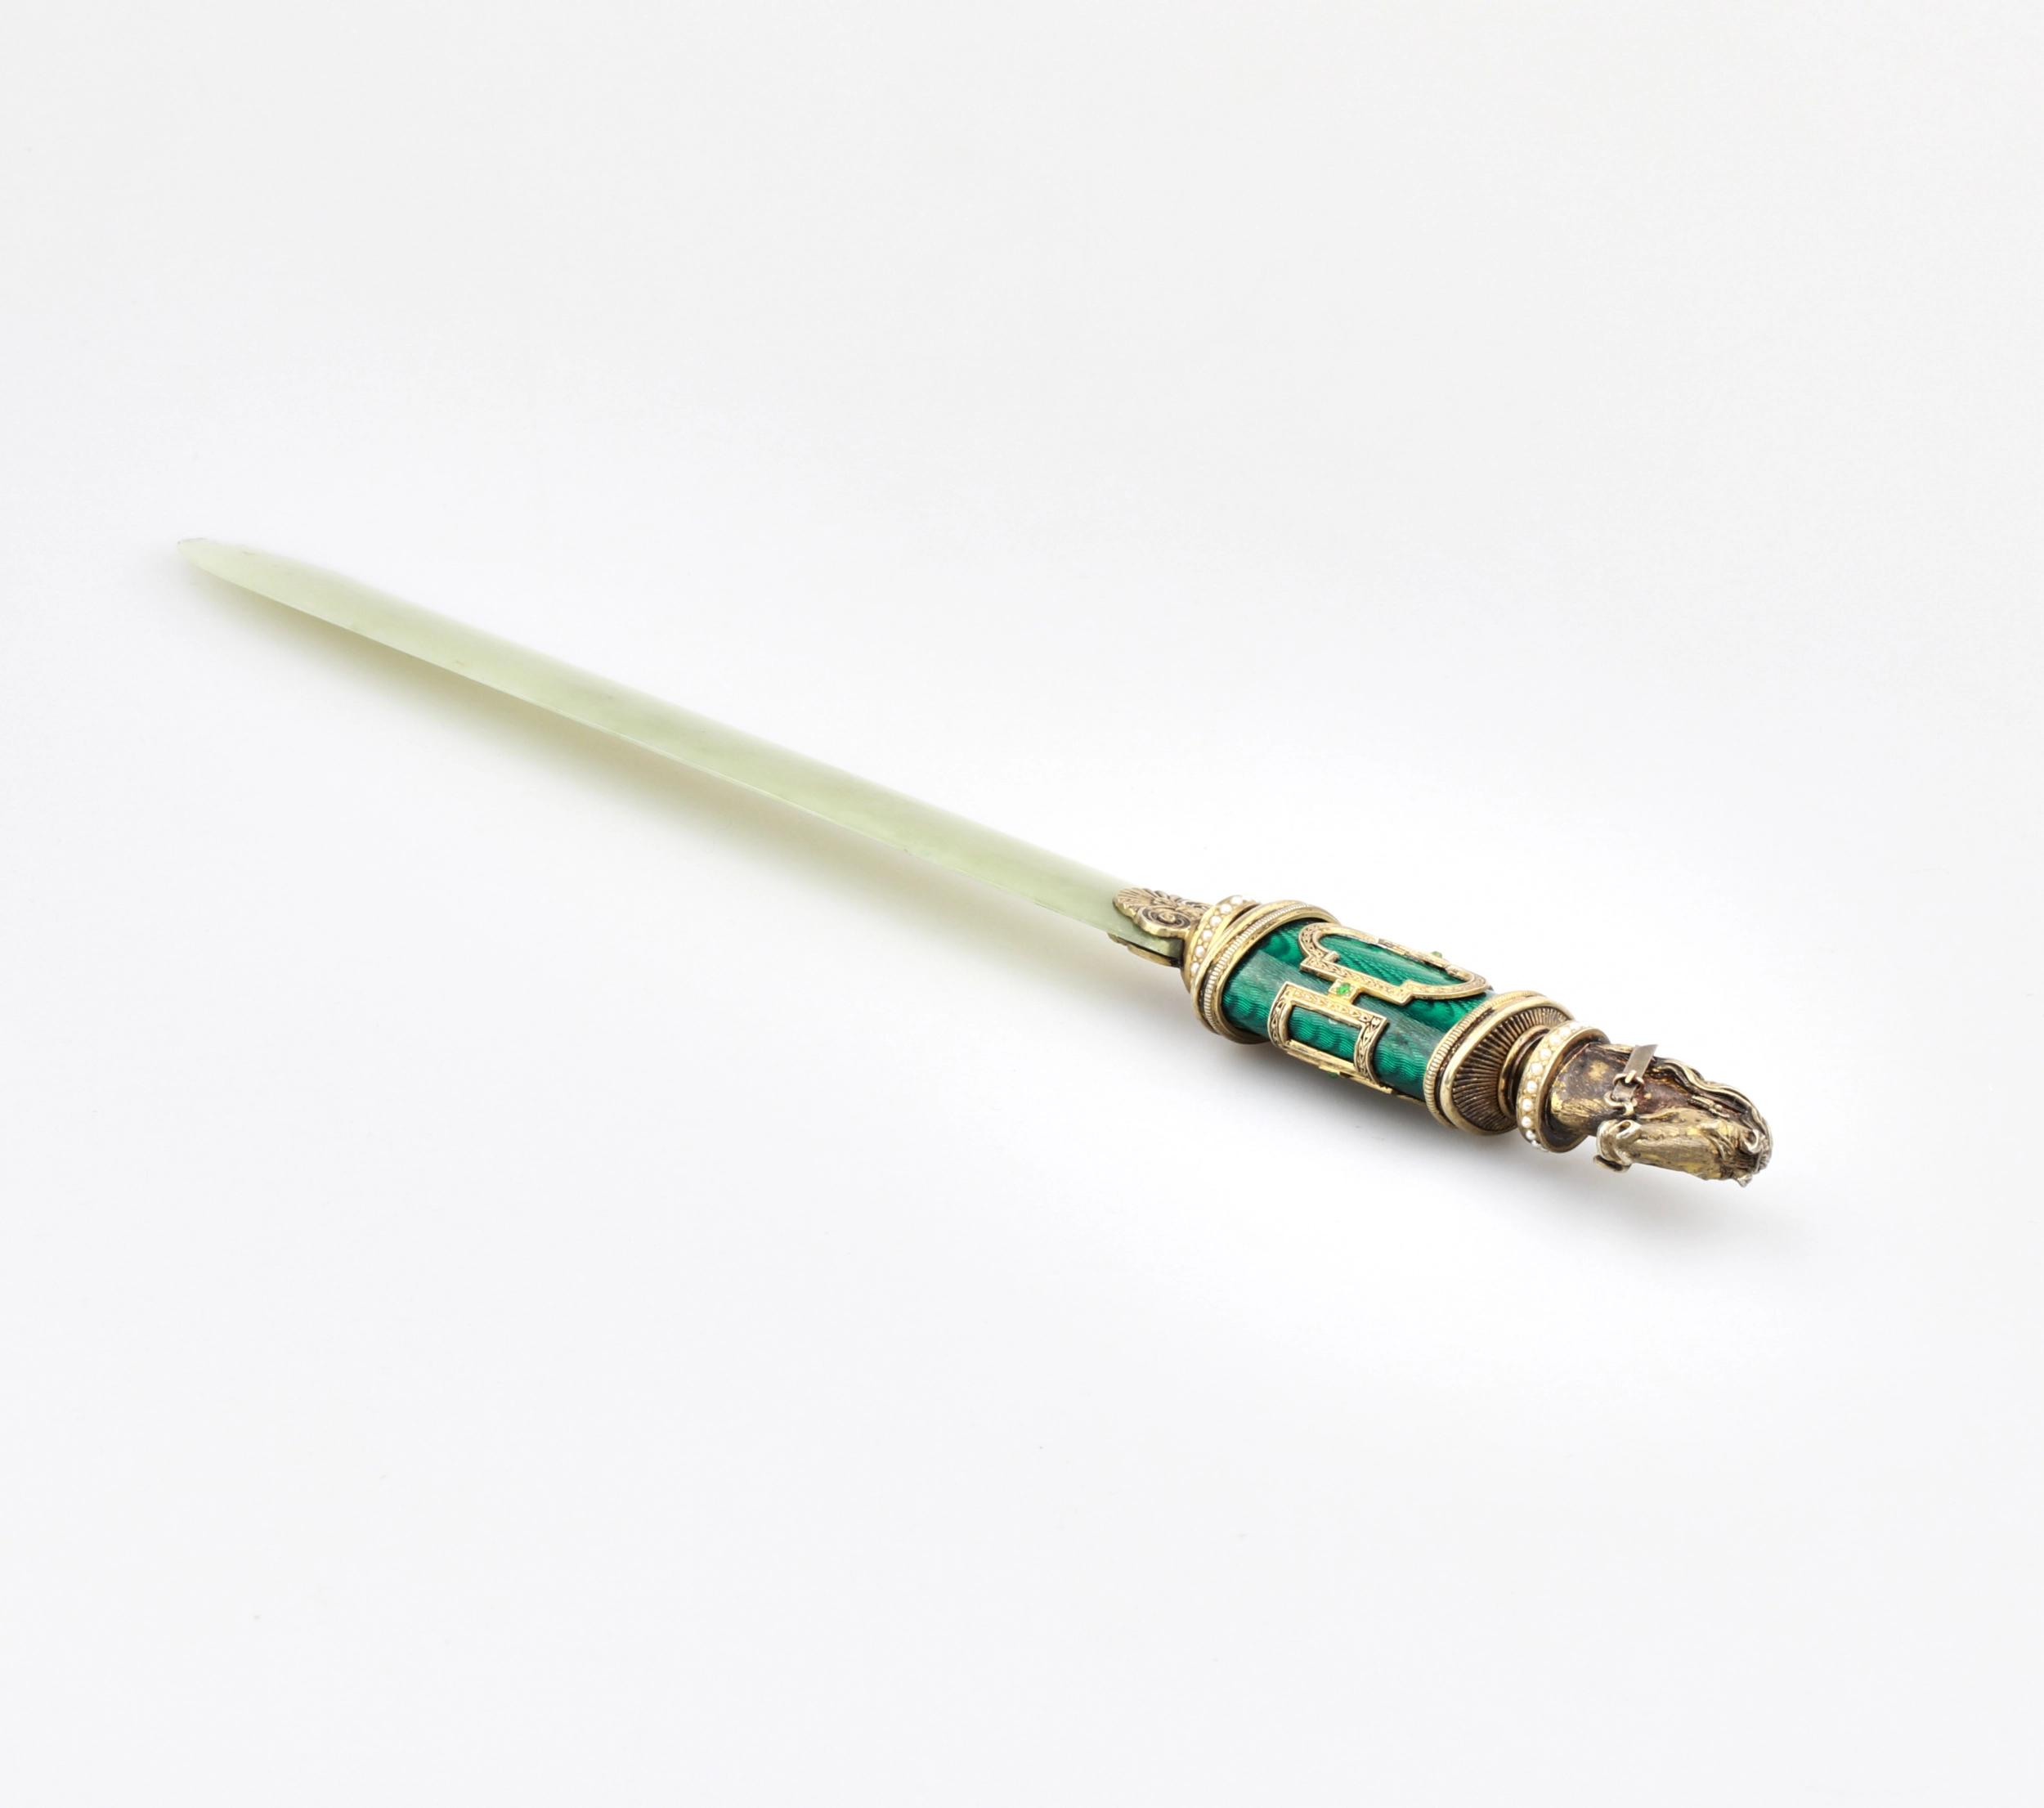 Faberge style horse head written knife - Image 2 of 6